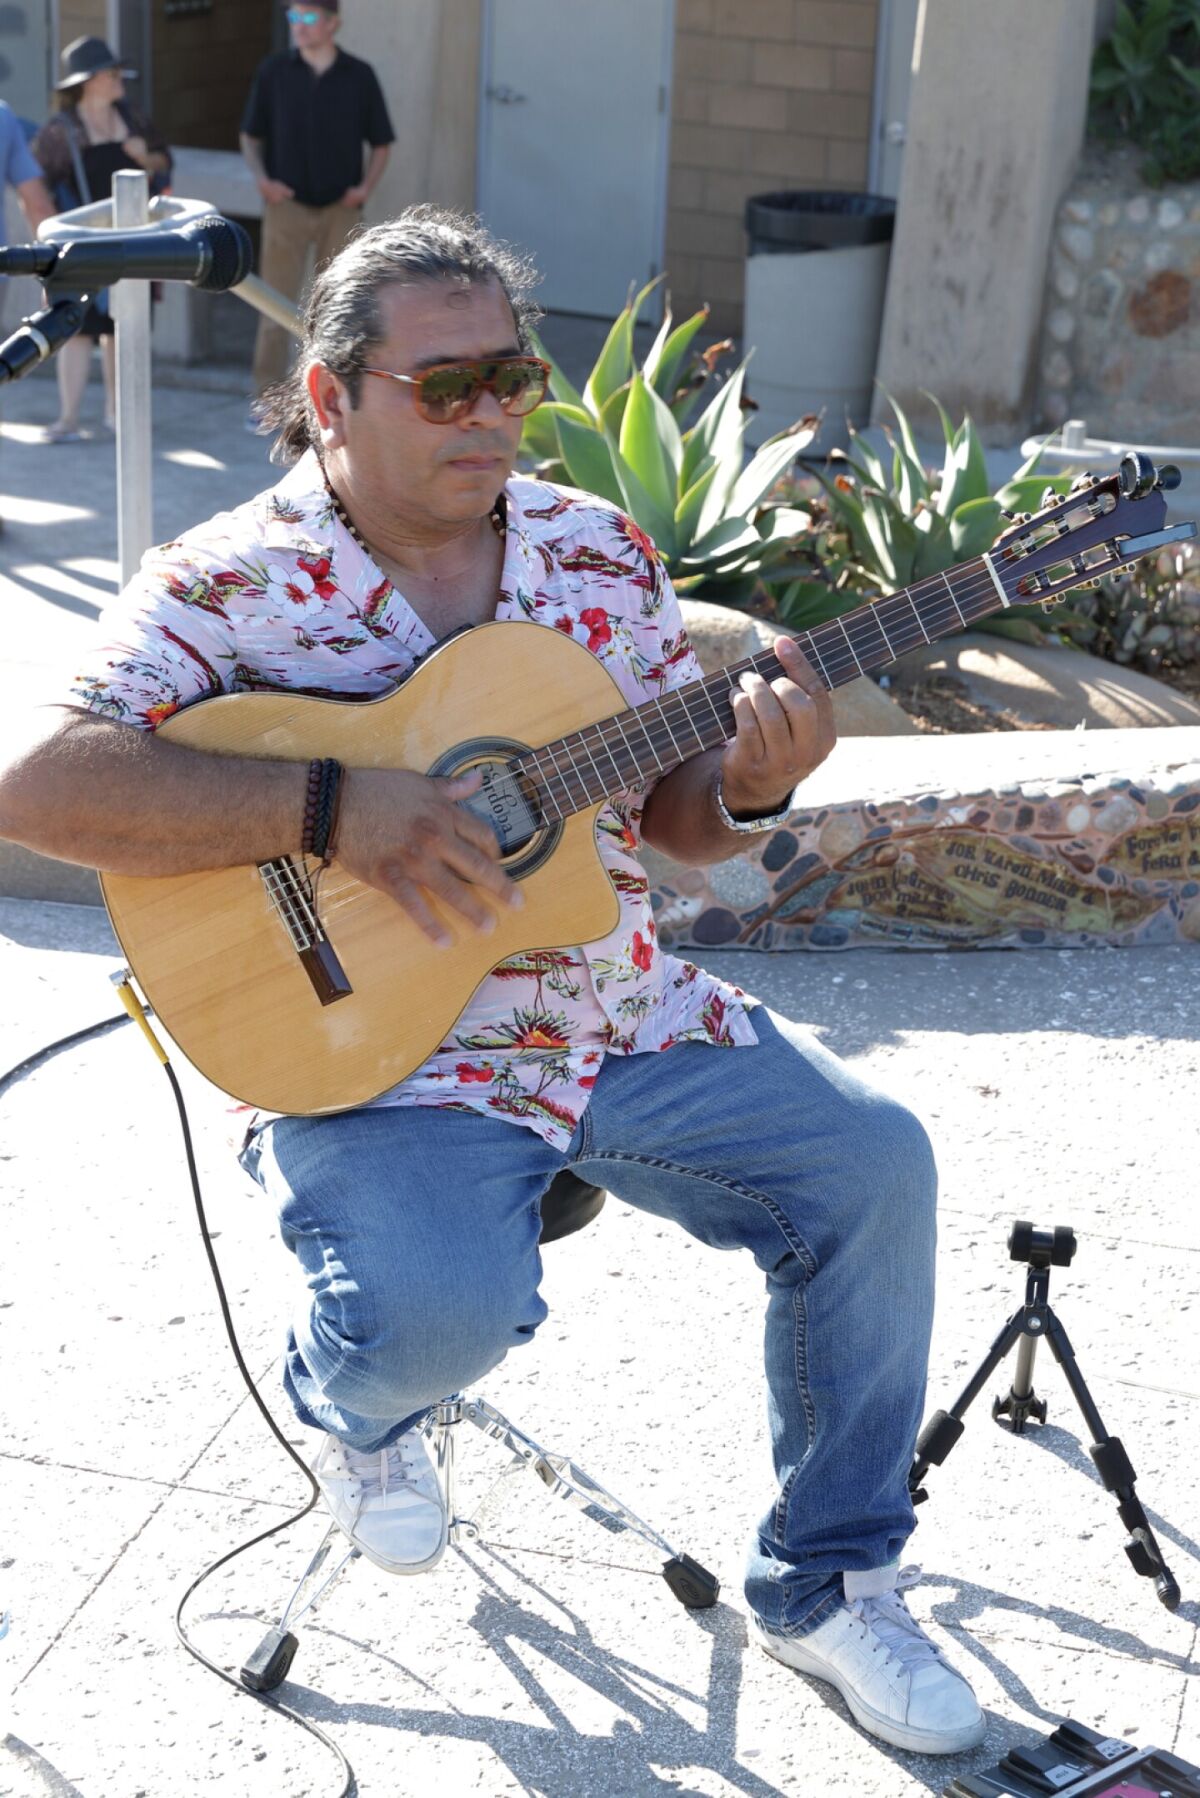 Guitarist Sergio D. Tala was the featured performer at the June 23 Concerts at the Cove event in Solana Beach.